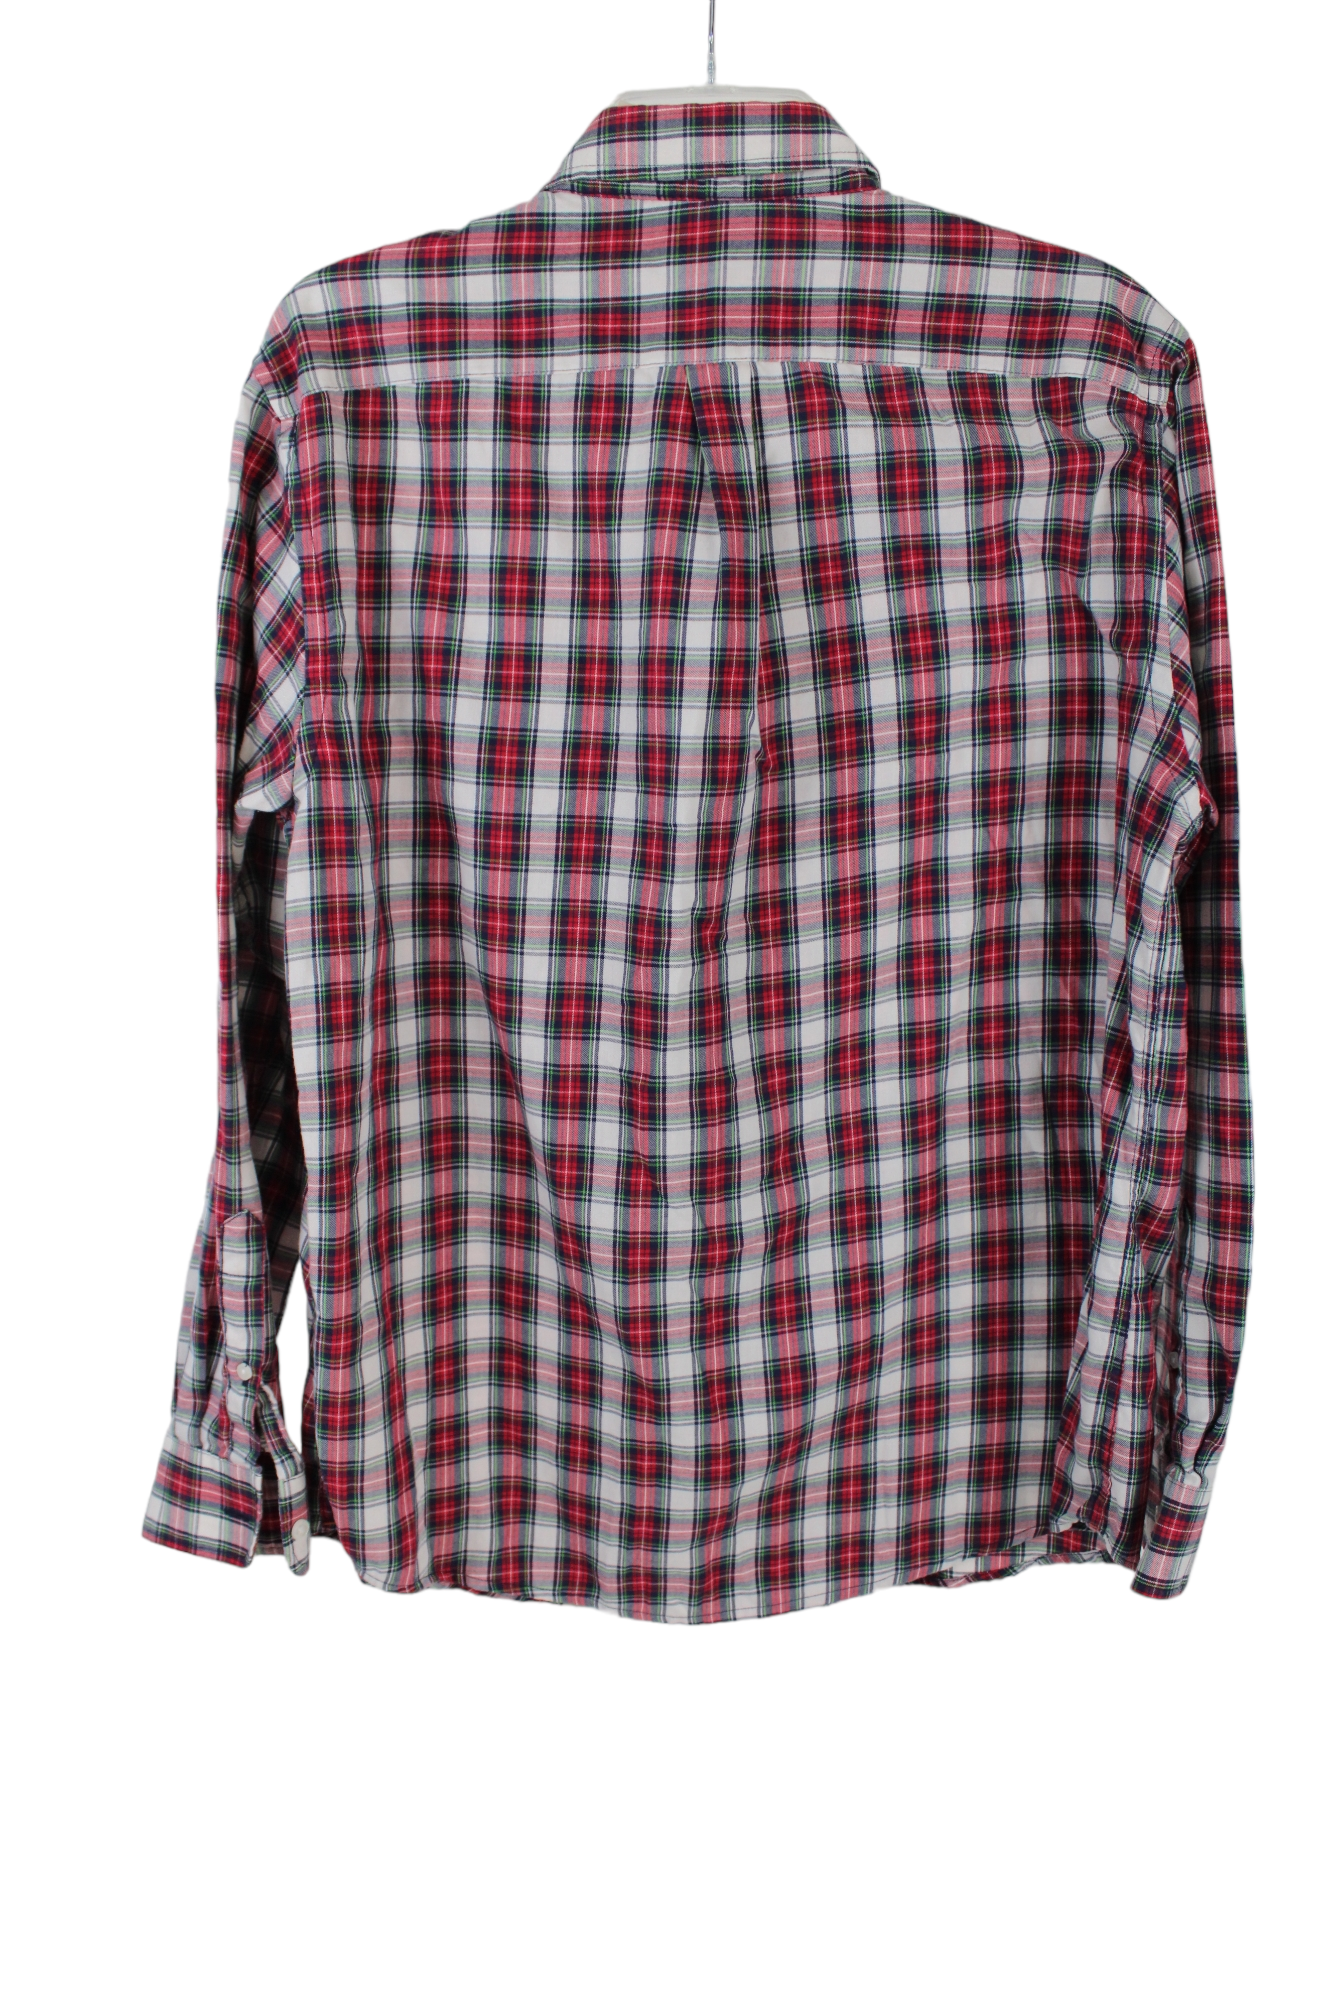 Dockers Red Plaid Classic Fit Button Down Shirt | L